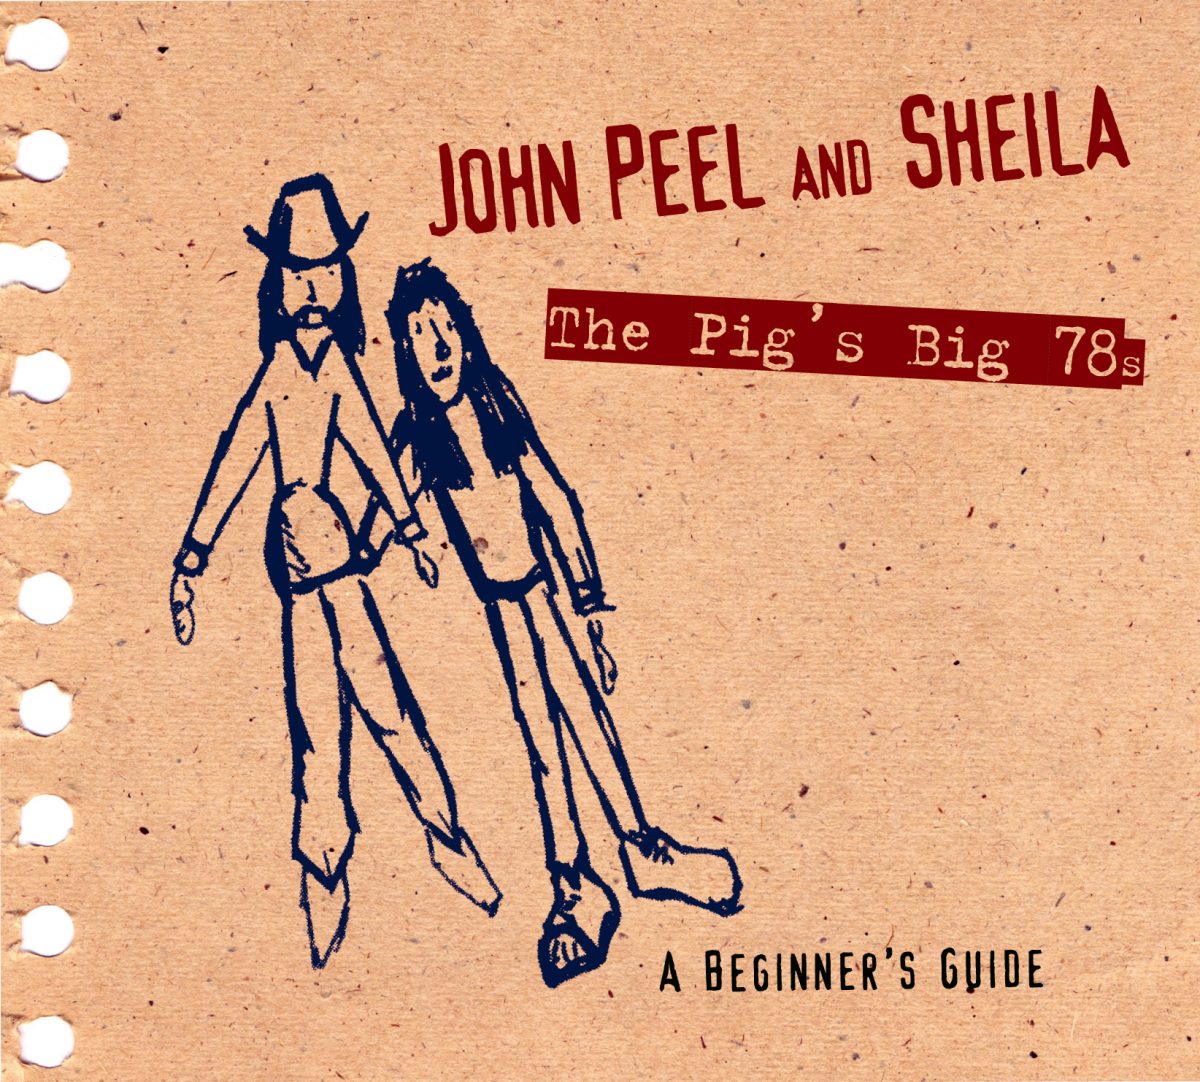 John Peel and Sheila - The Pig's Big 78's - A Beginner's Guide 1